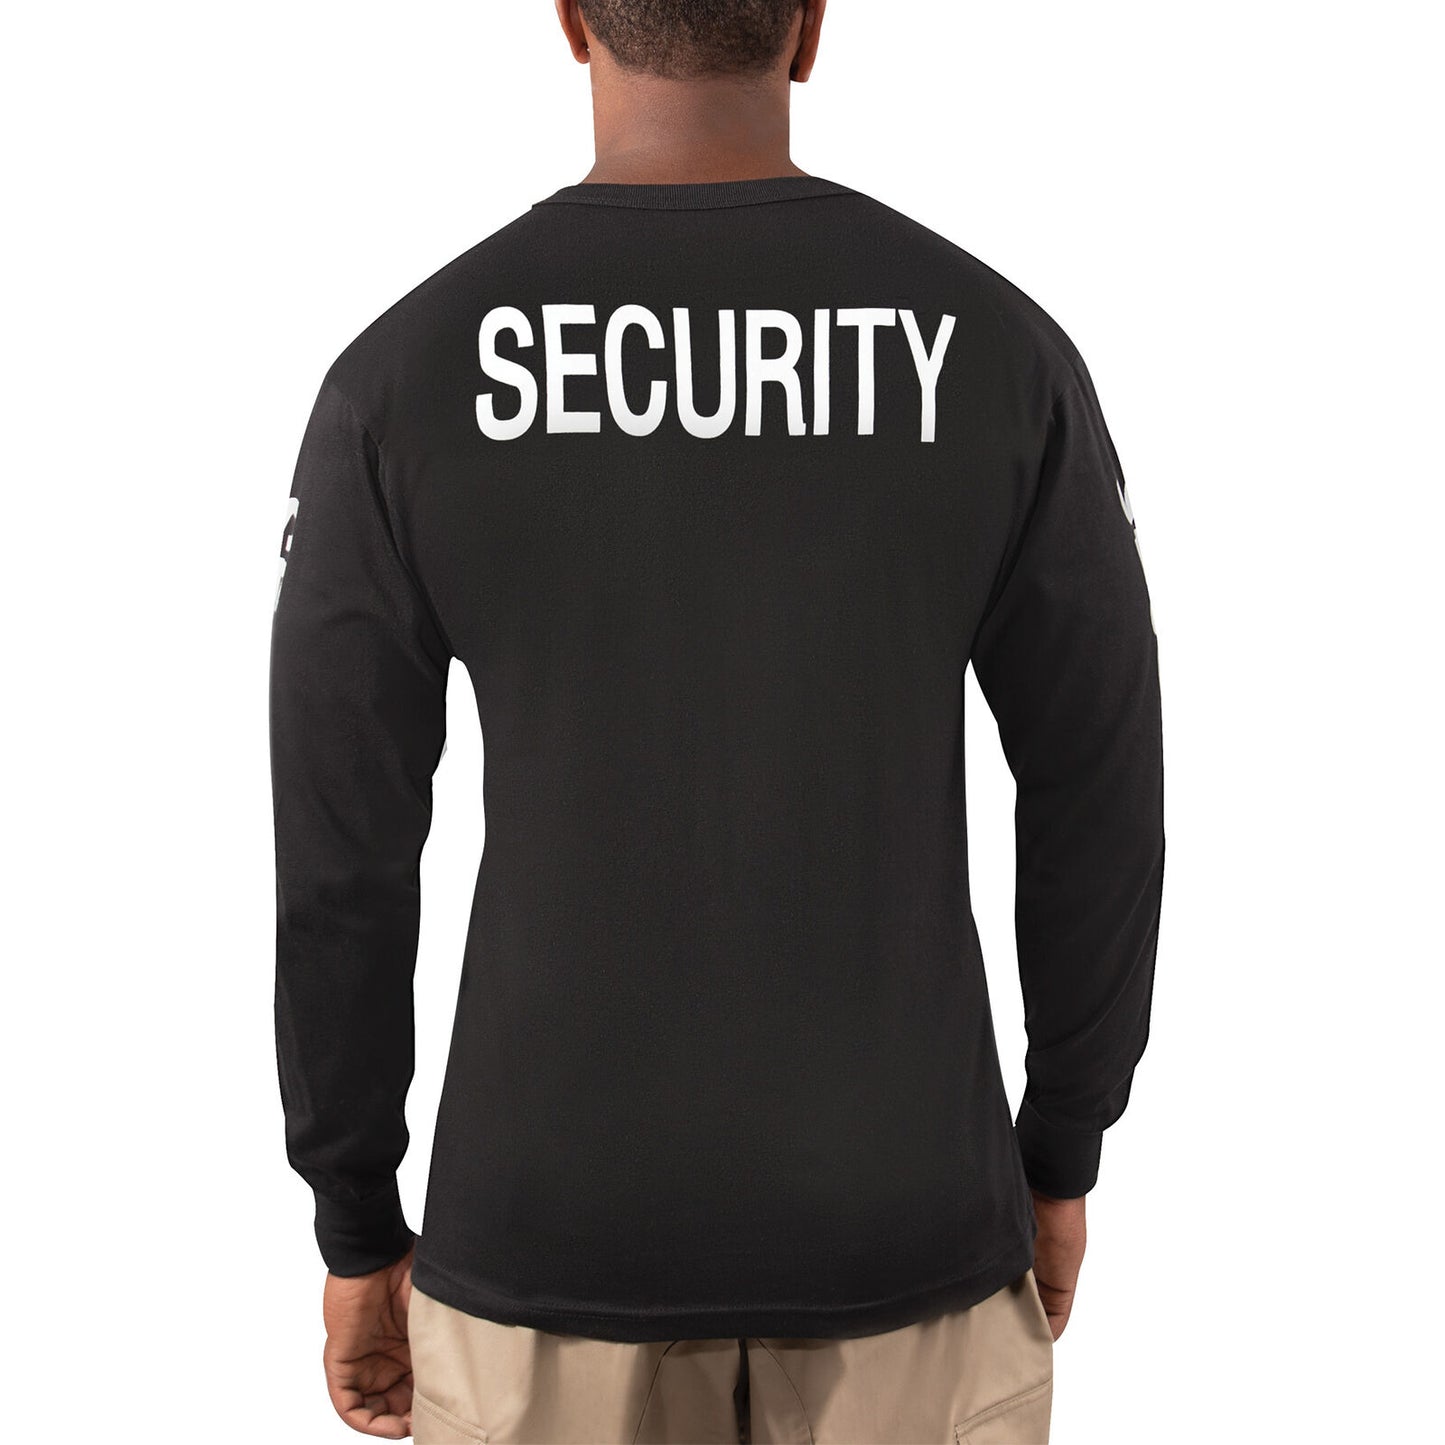 Men's Long Sleeve Two-Sided SECURITY T-Shirt in Black